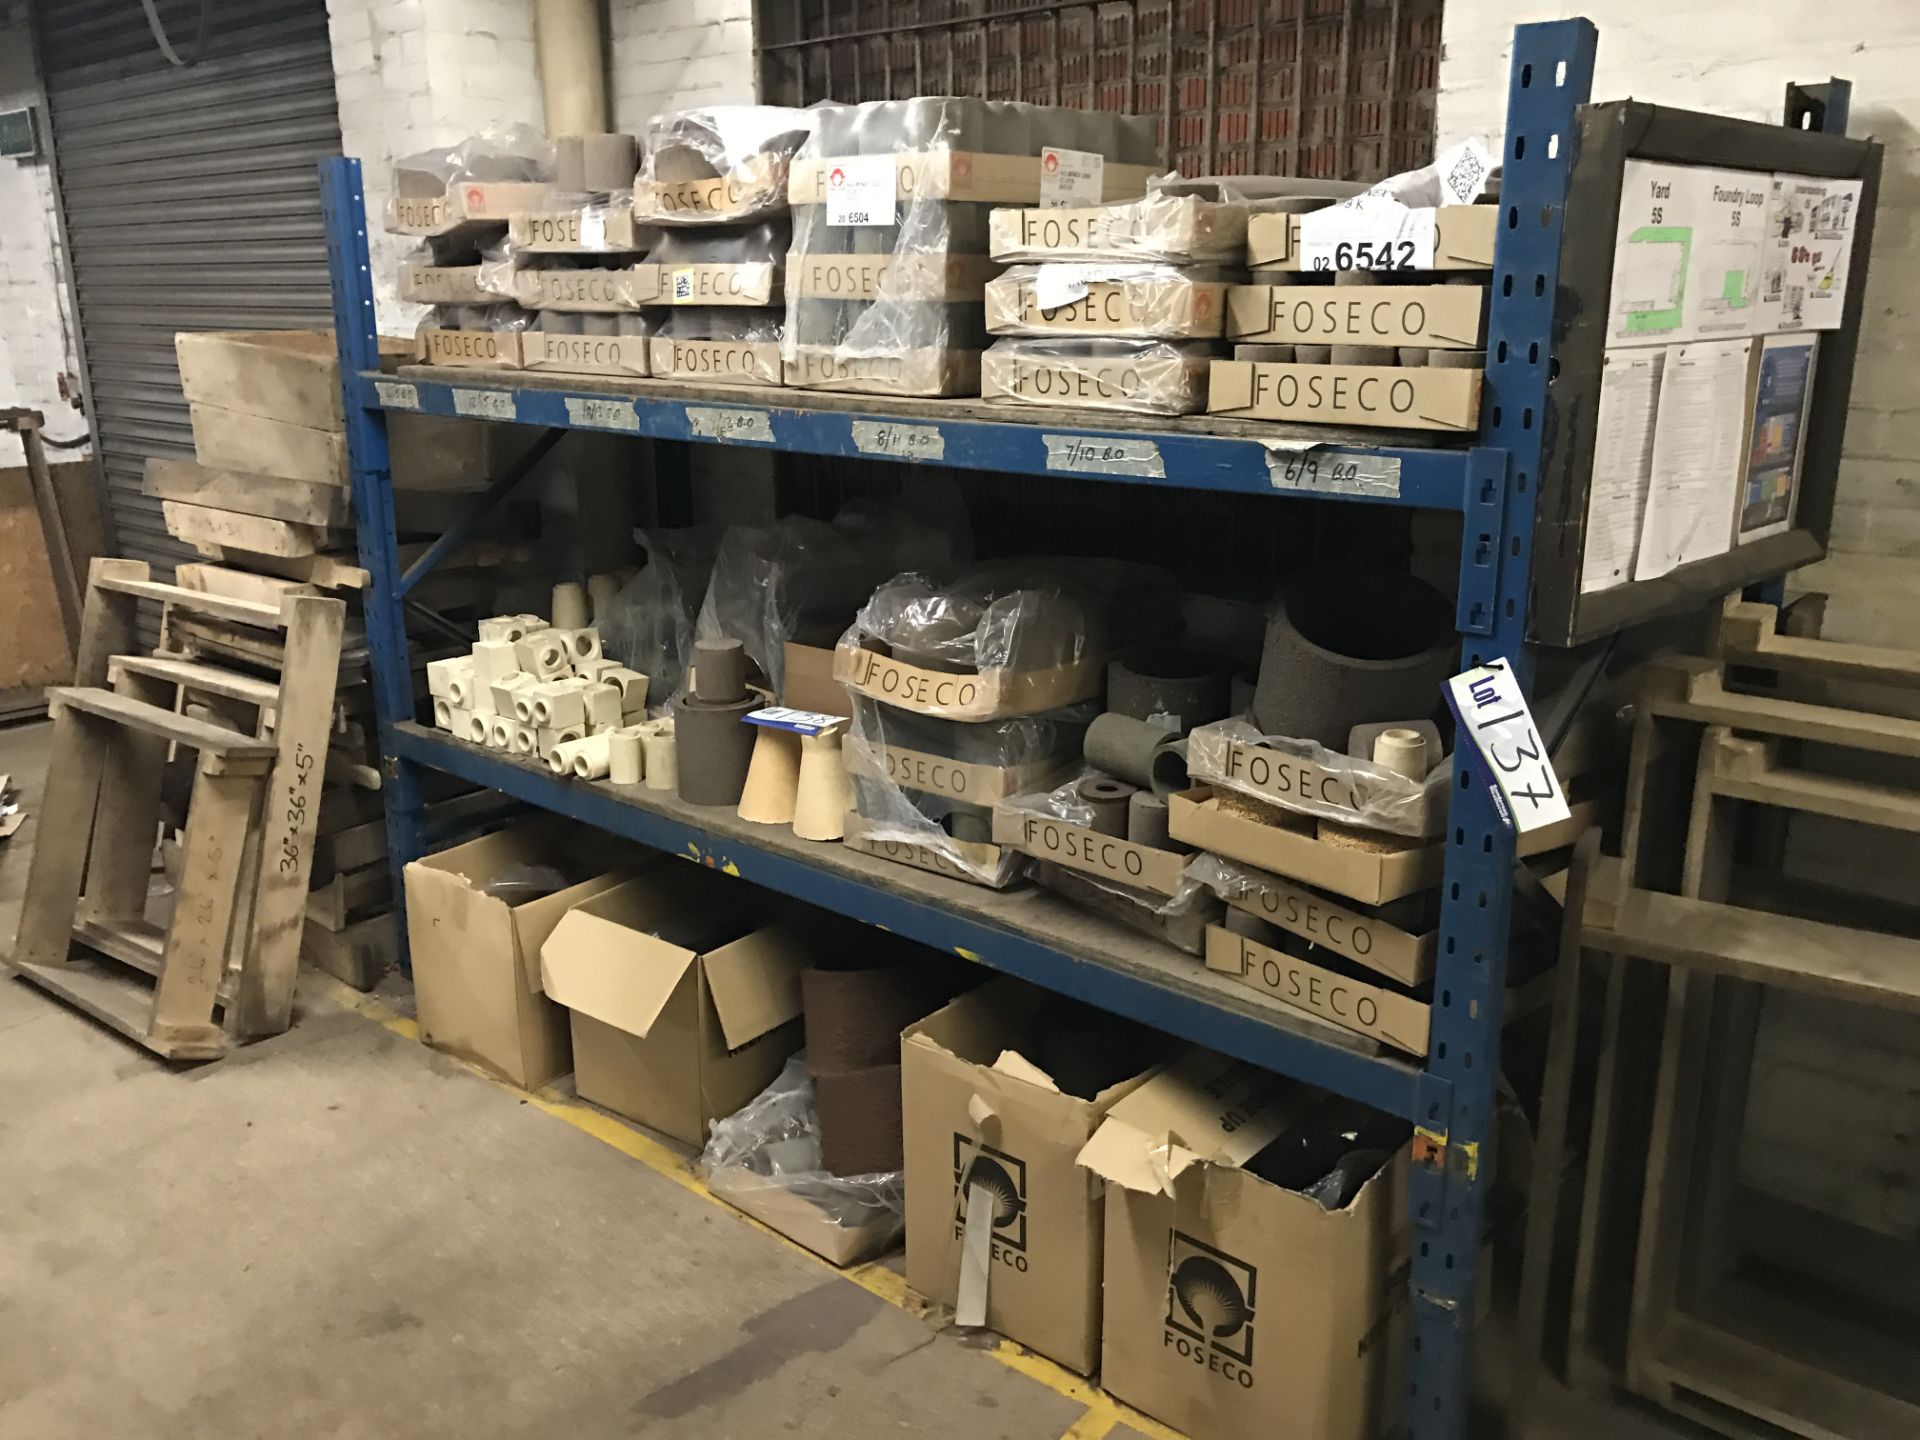 Two Bays of Pallet Racking